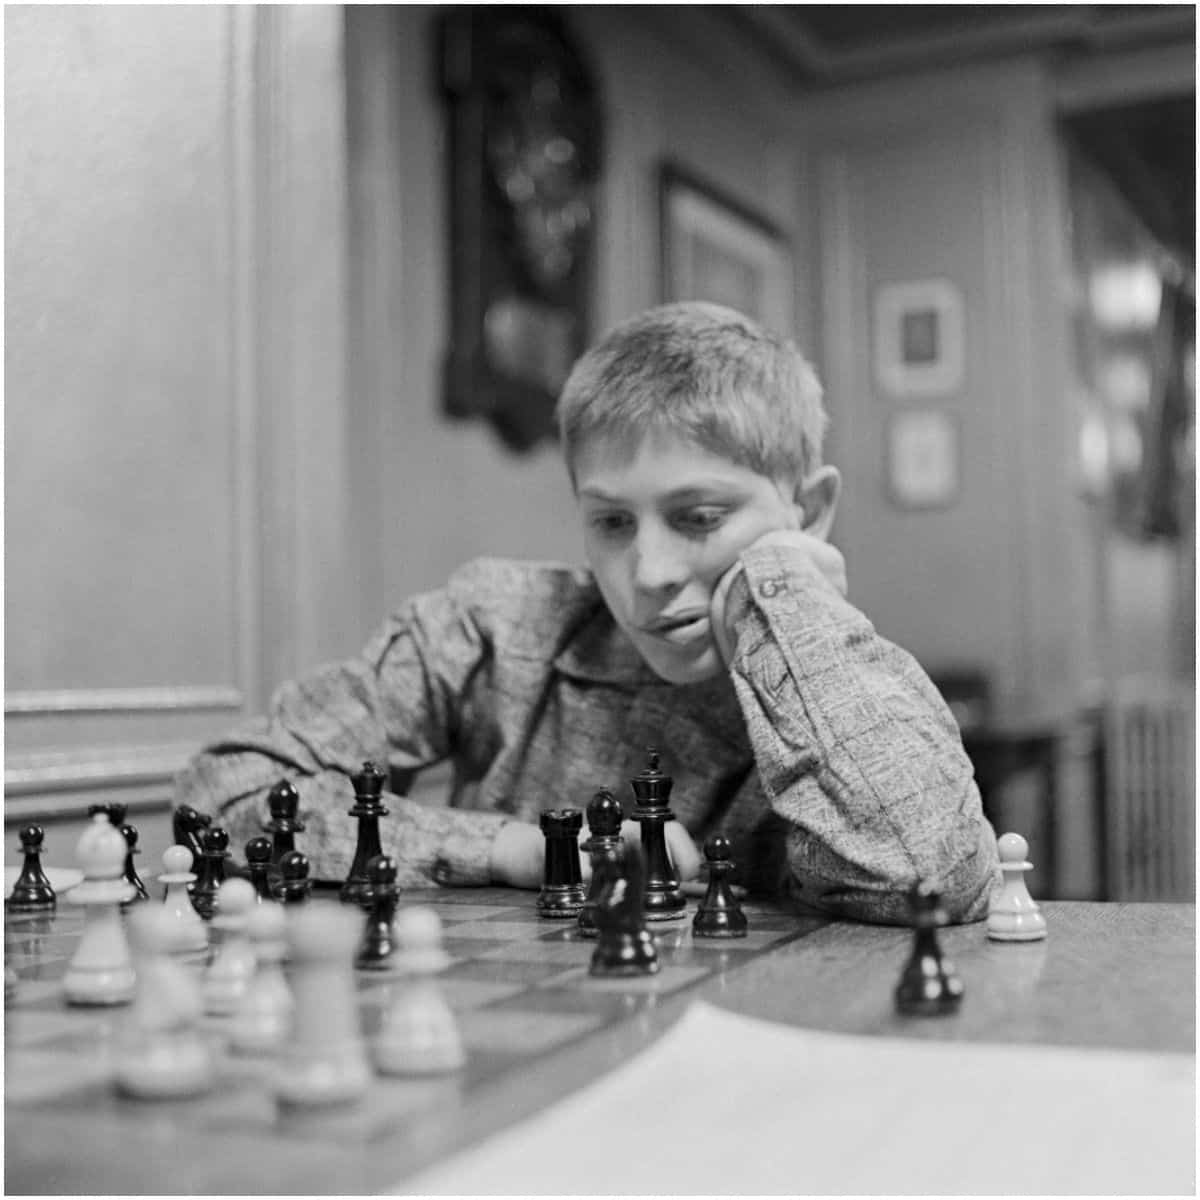 Bobby Fischer Net Worth  Wife - Famous People Today